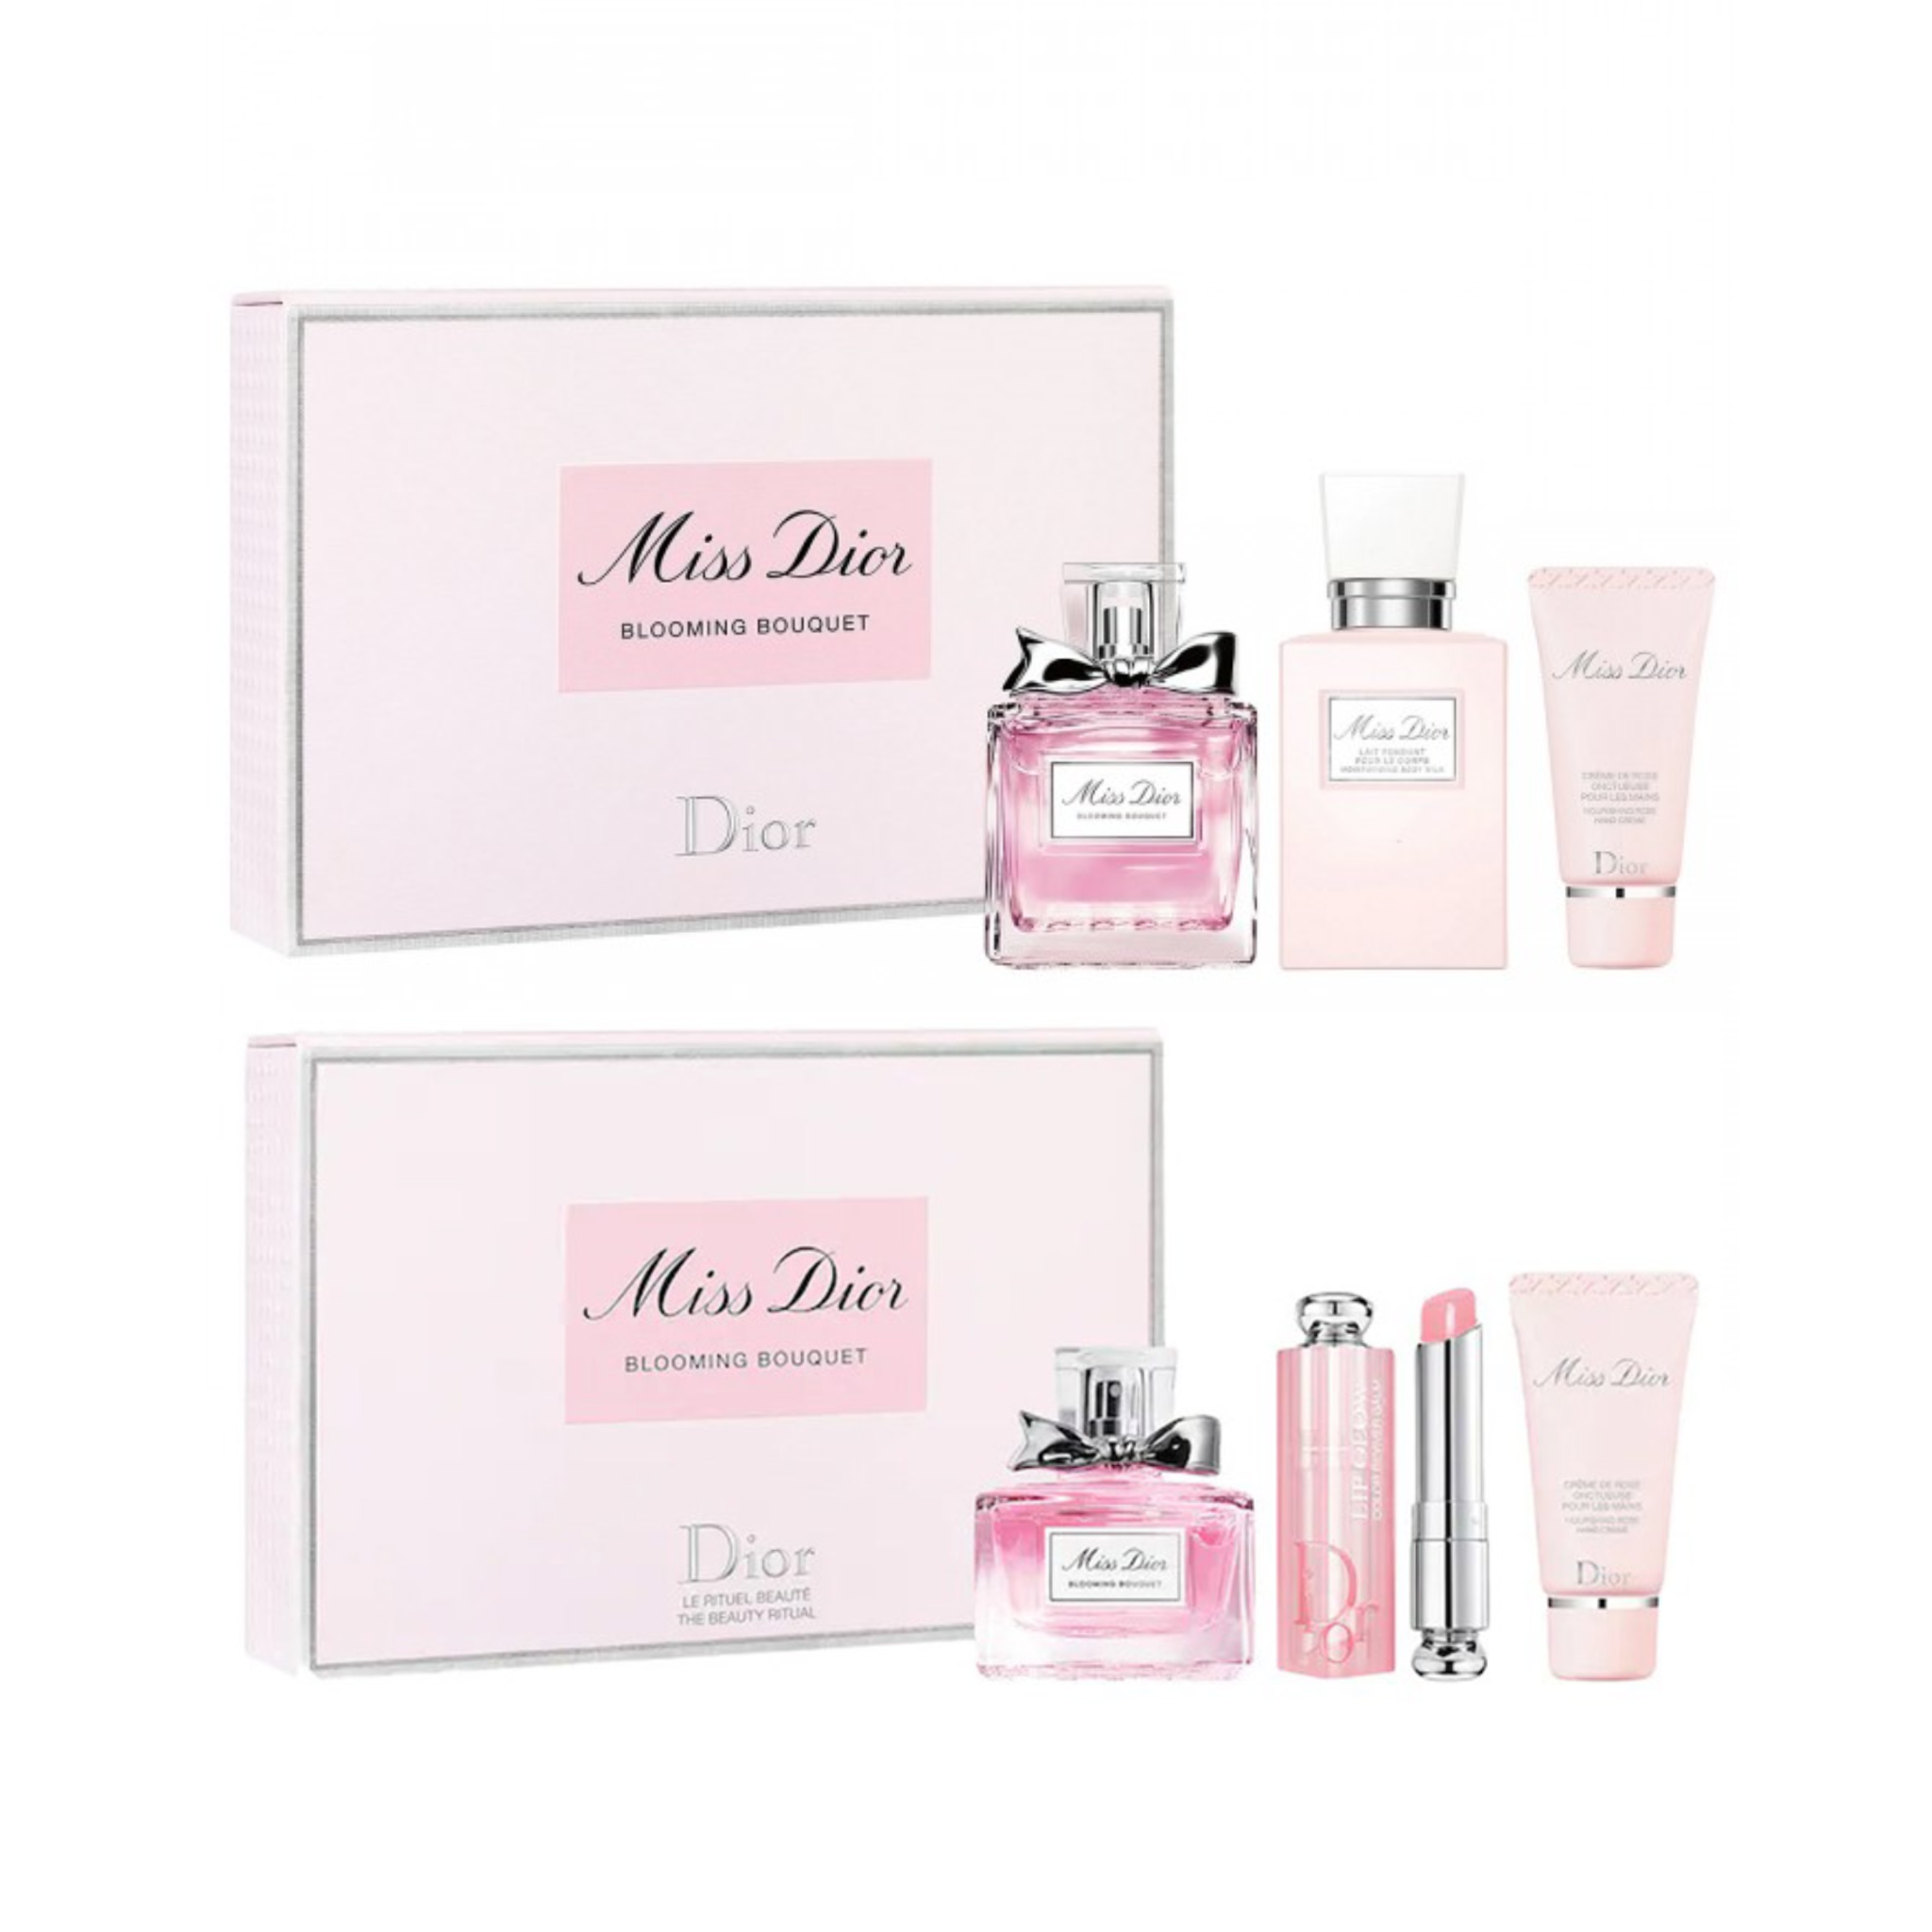 DIOR Miss Dior Blooming Bouquet Limited Edition Gift Set 100ml NZ  Adore  Beauty